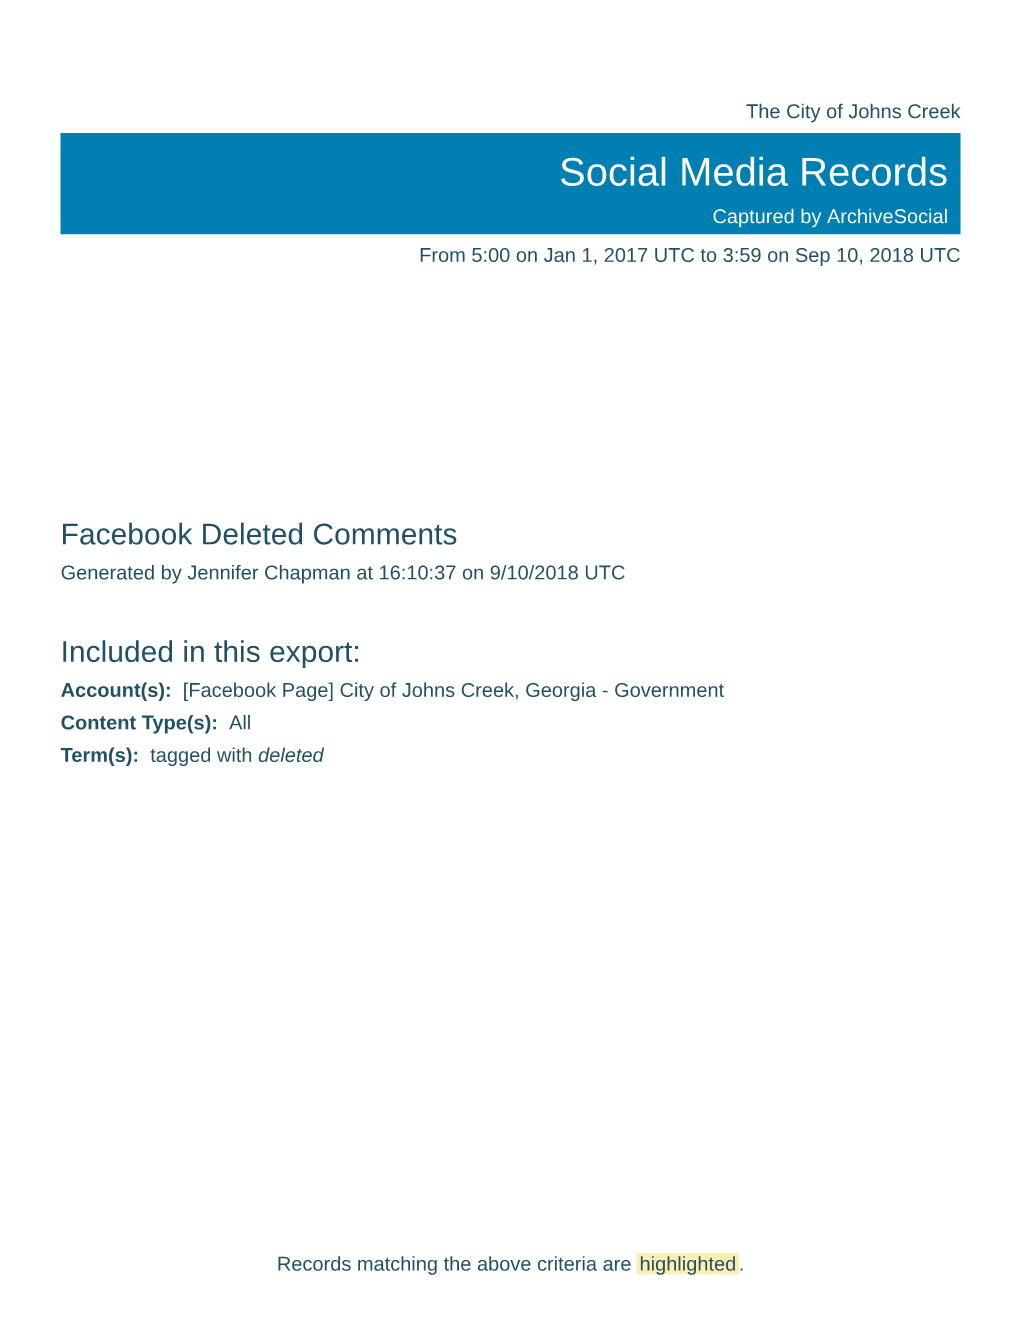 Social Media Records Captured by Archivesocial from 5:00 on Jan 1, 2017 UTC to 3:59 on Sep 10, 2018 UTC